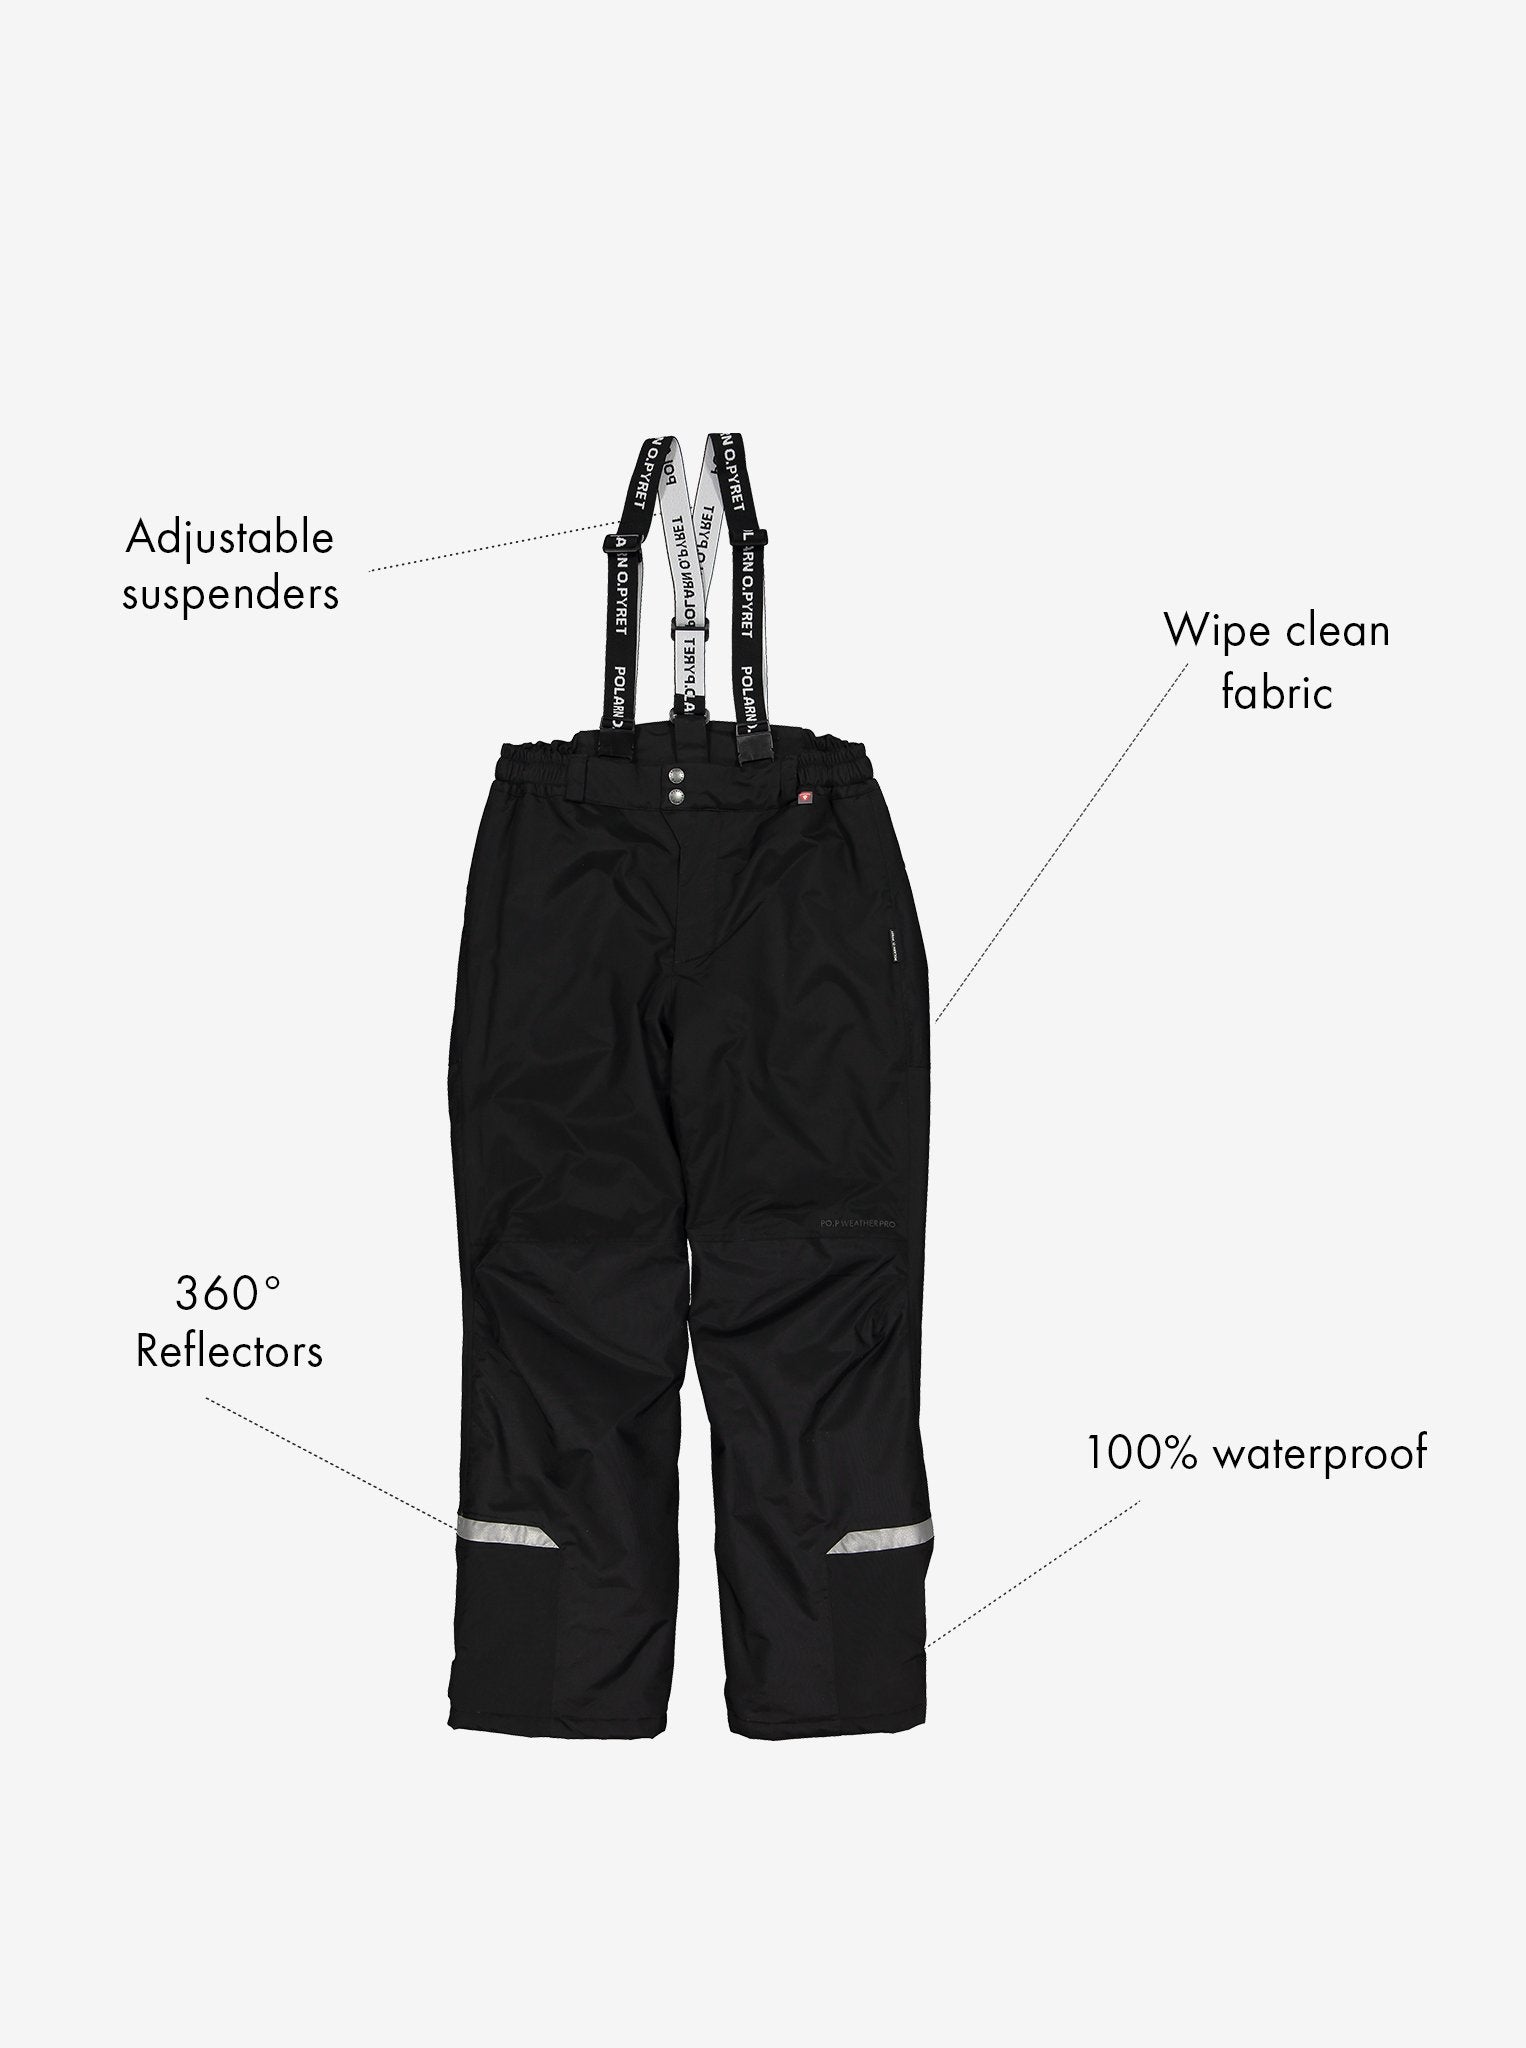 high tech waterproof padded kids winter overalls, cold and snow weather, comfortable and warm, ethical and long lasting